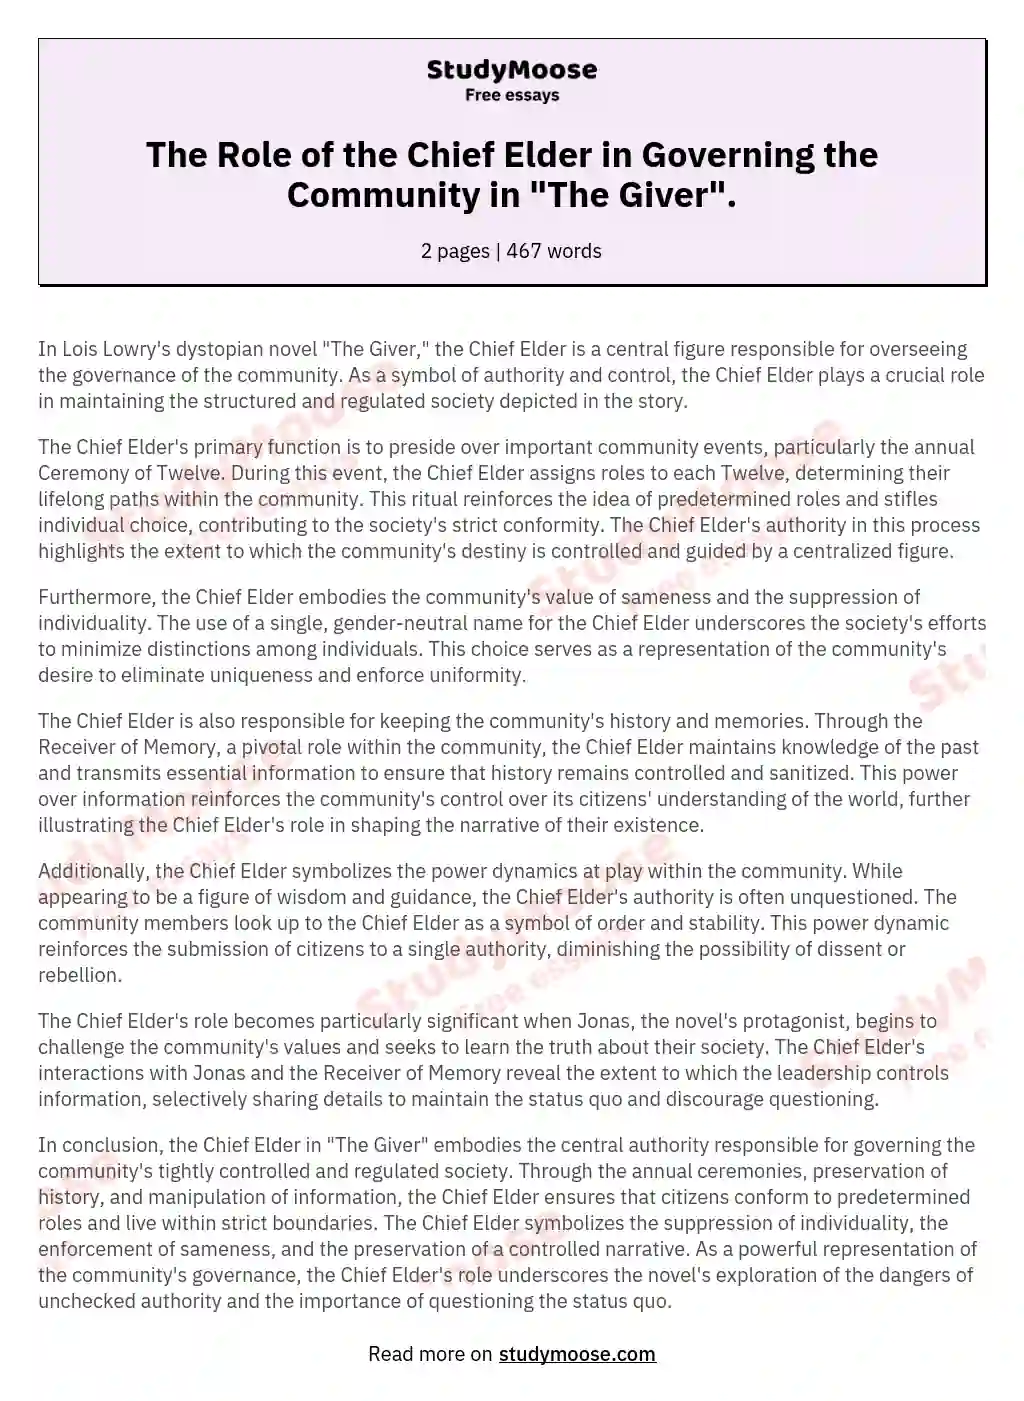 The Role of the Chief Elder in Governing the Community in "The Giver". essay